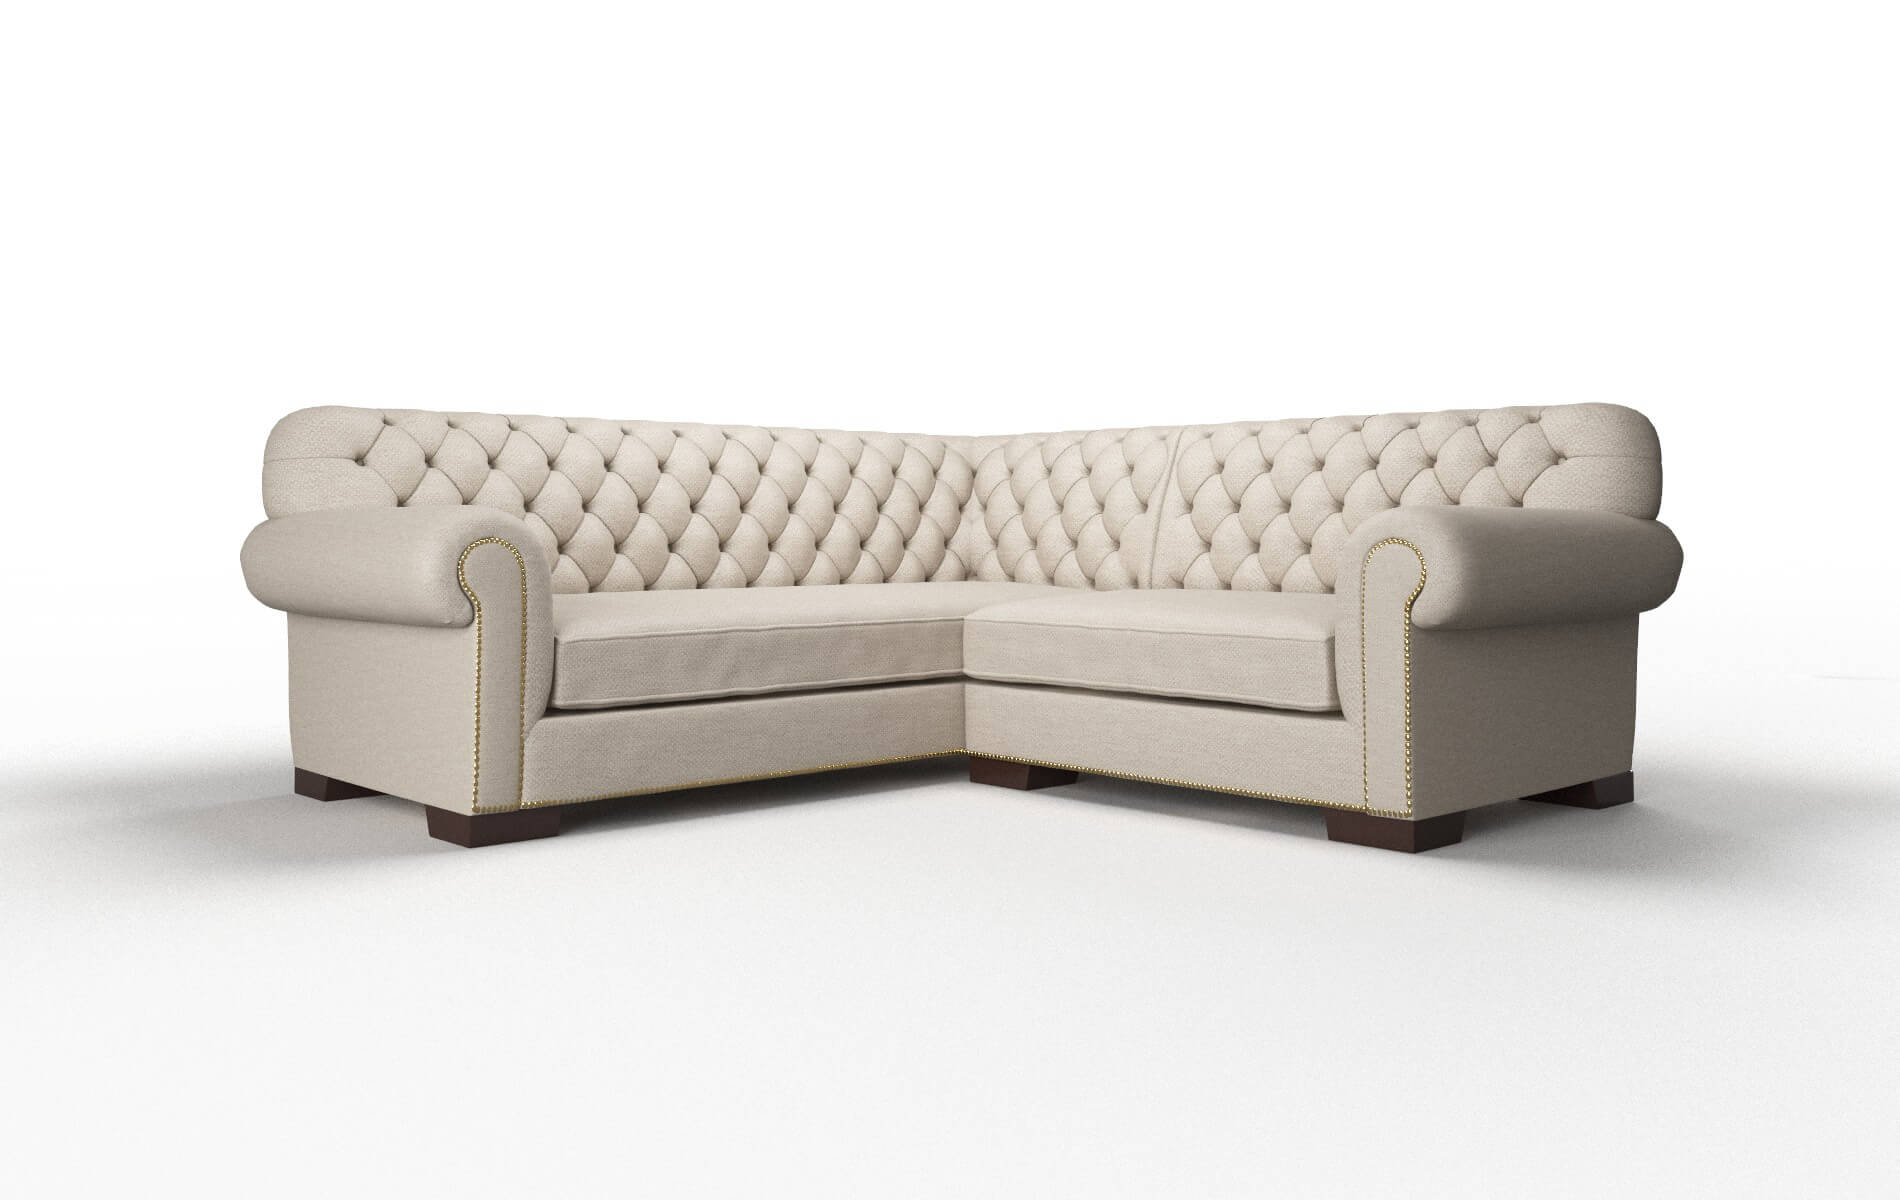 Chester Naples Almond Sectional espresso legs